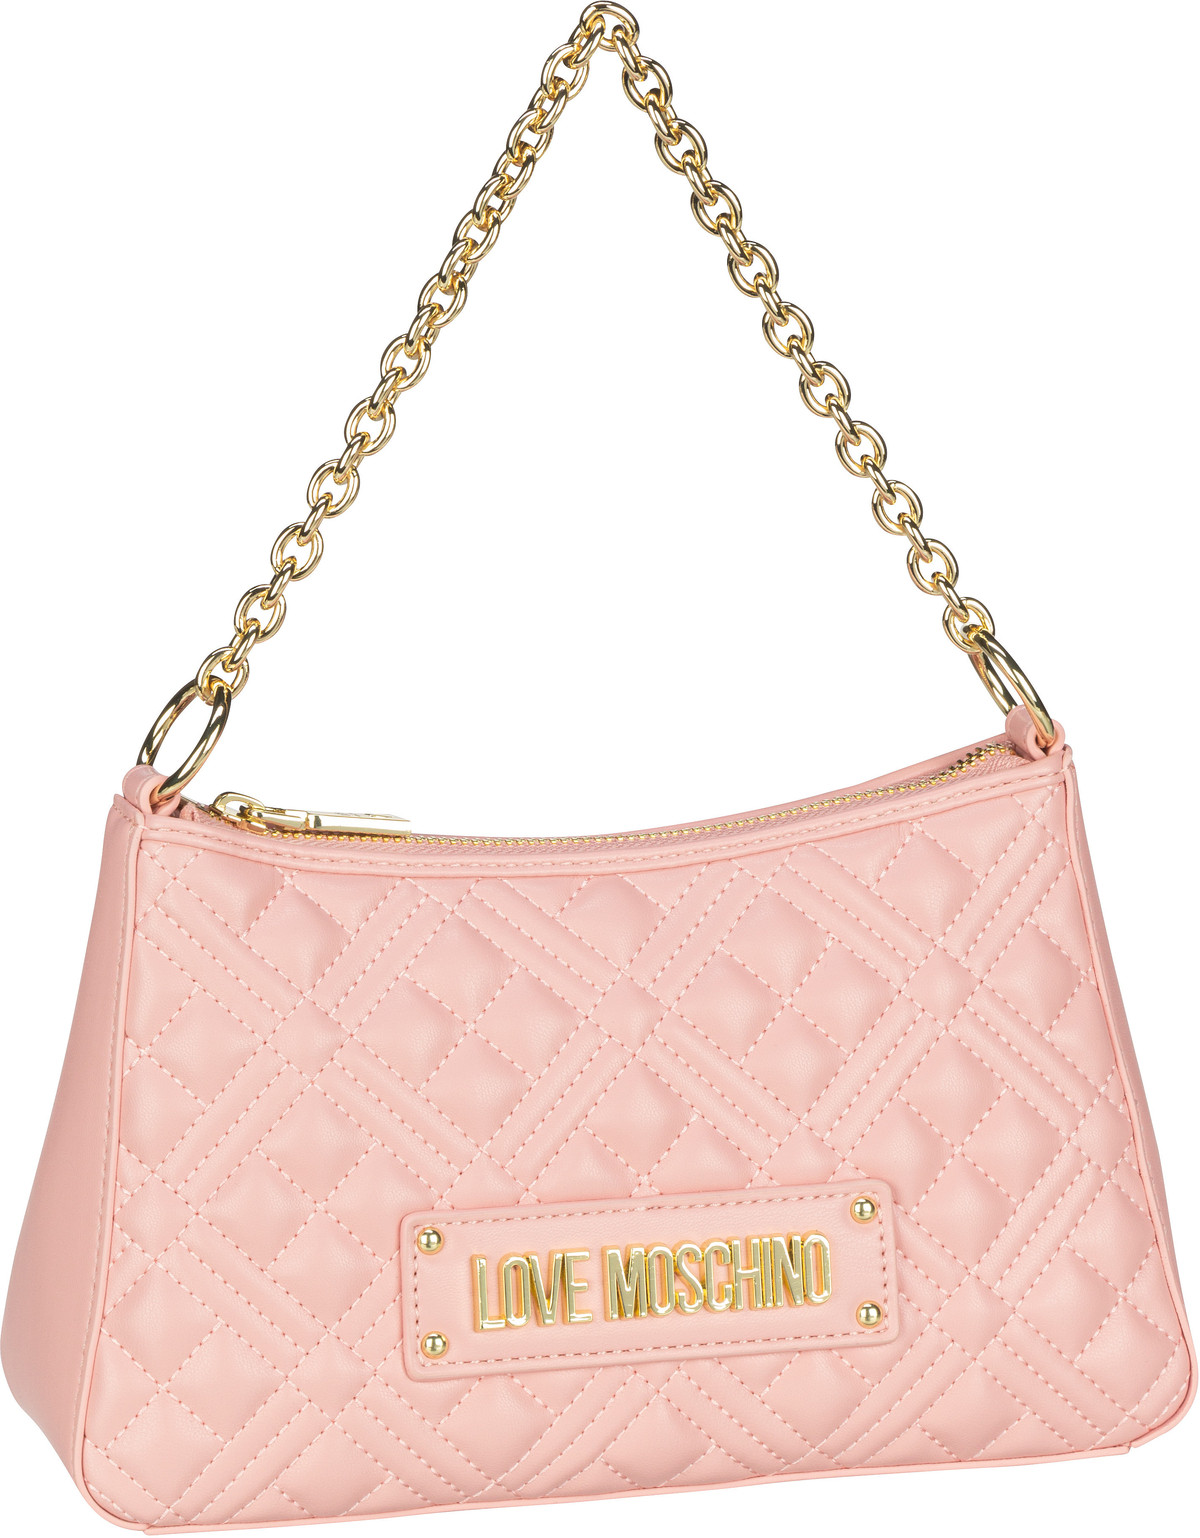 Love Moschino Quilted Bag 4135 - Pink